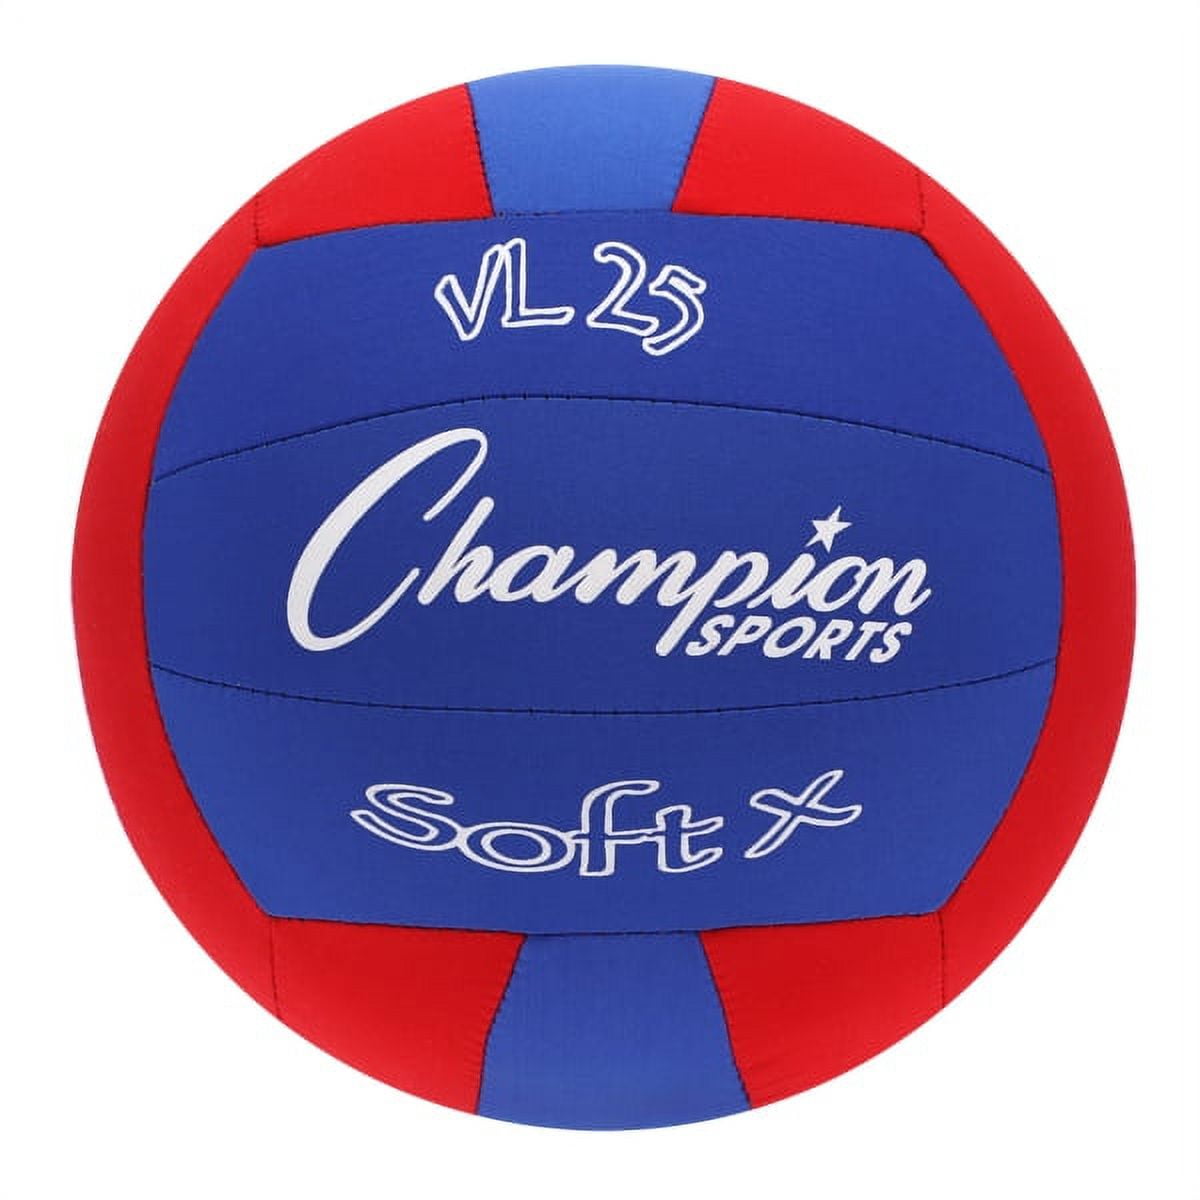 Picture of Champion Sports VL25 Rhino Skin Soft Fabric Volleyball, Red & Blue